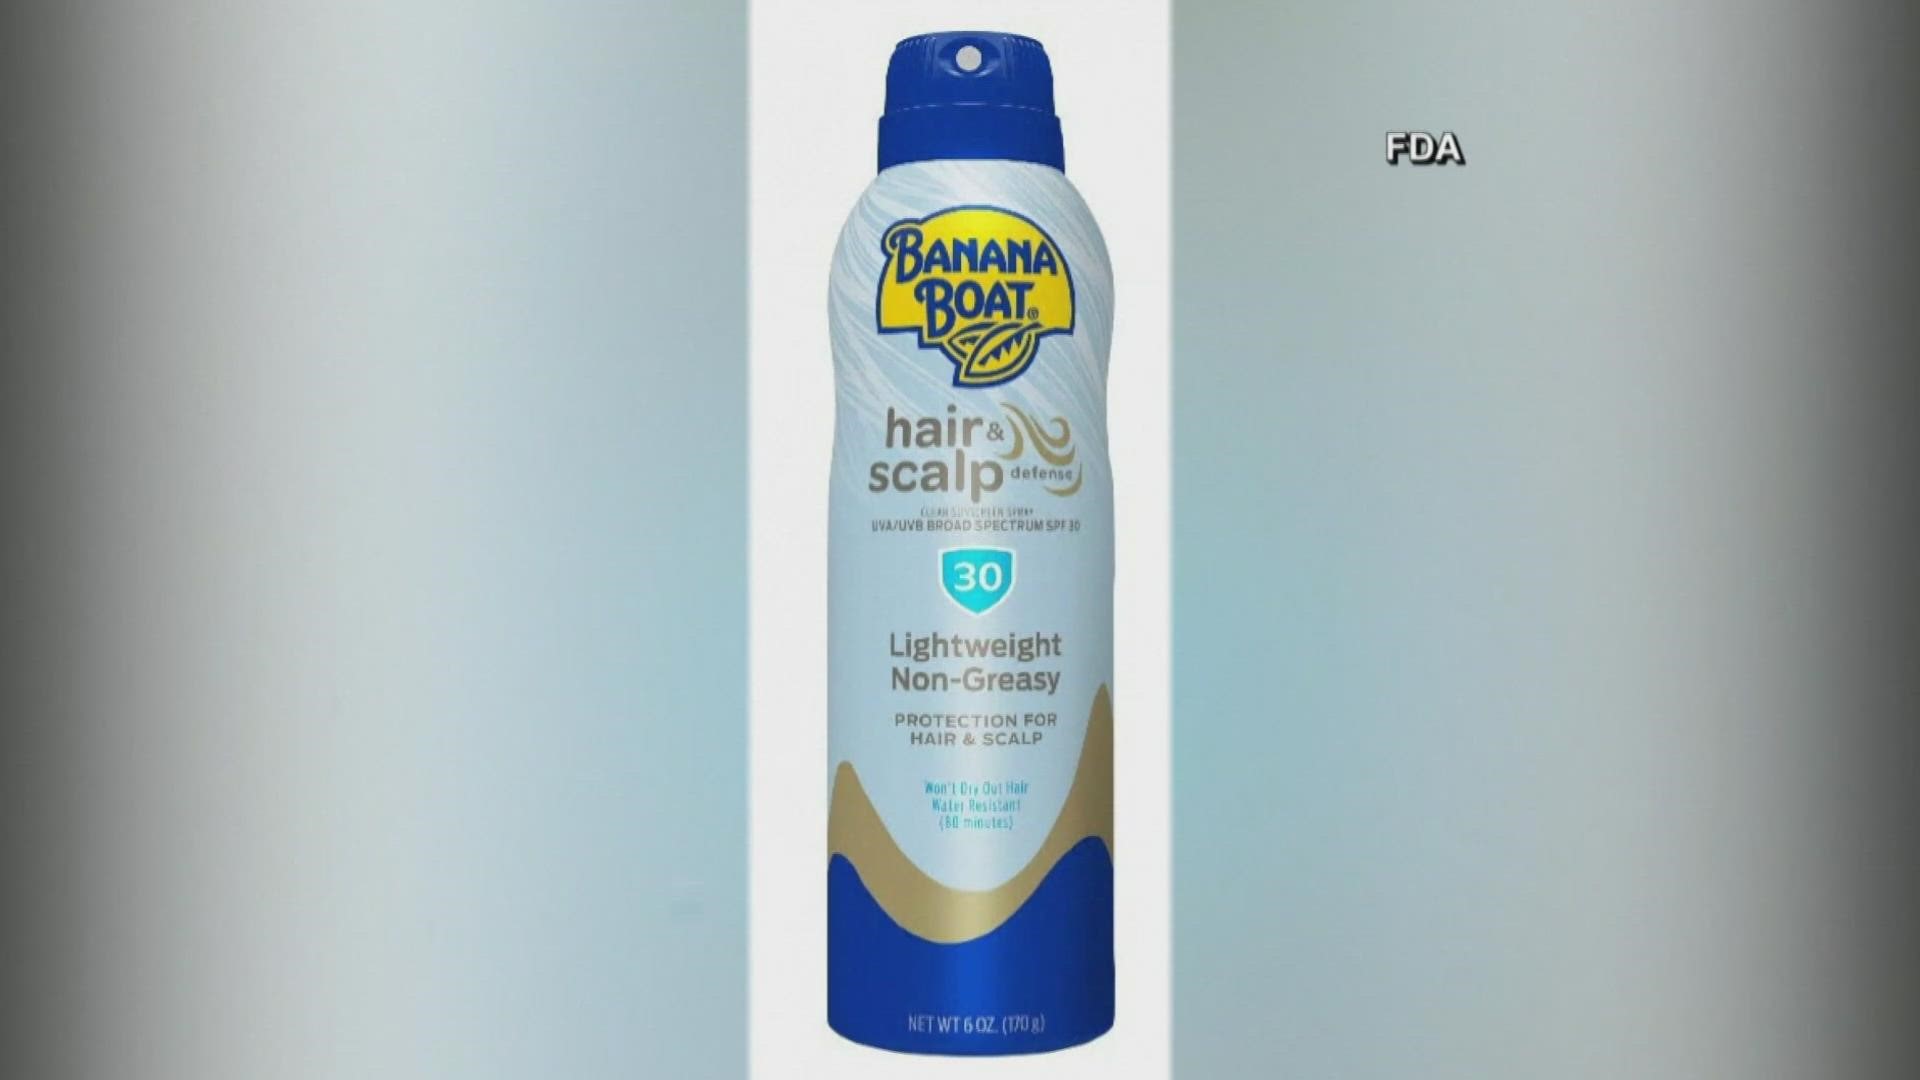 The voluntary recall now includes four batches of Banana Boat Hair & Scalp Sunscreen Spray SPF 30.